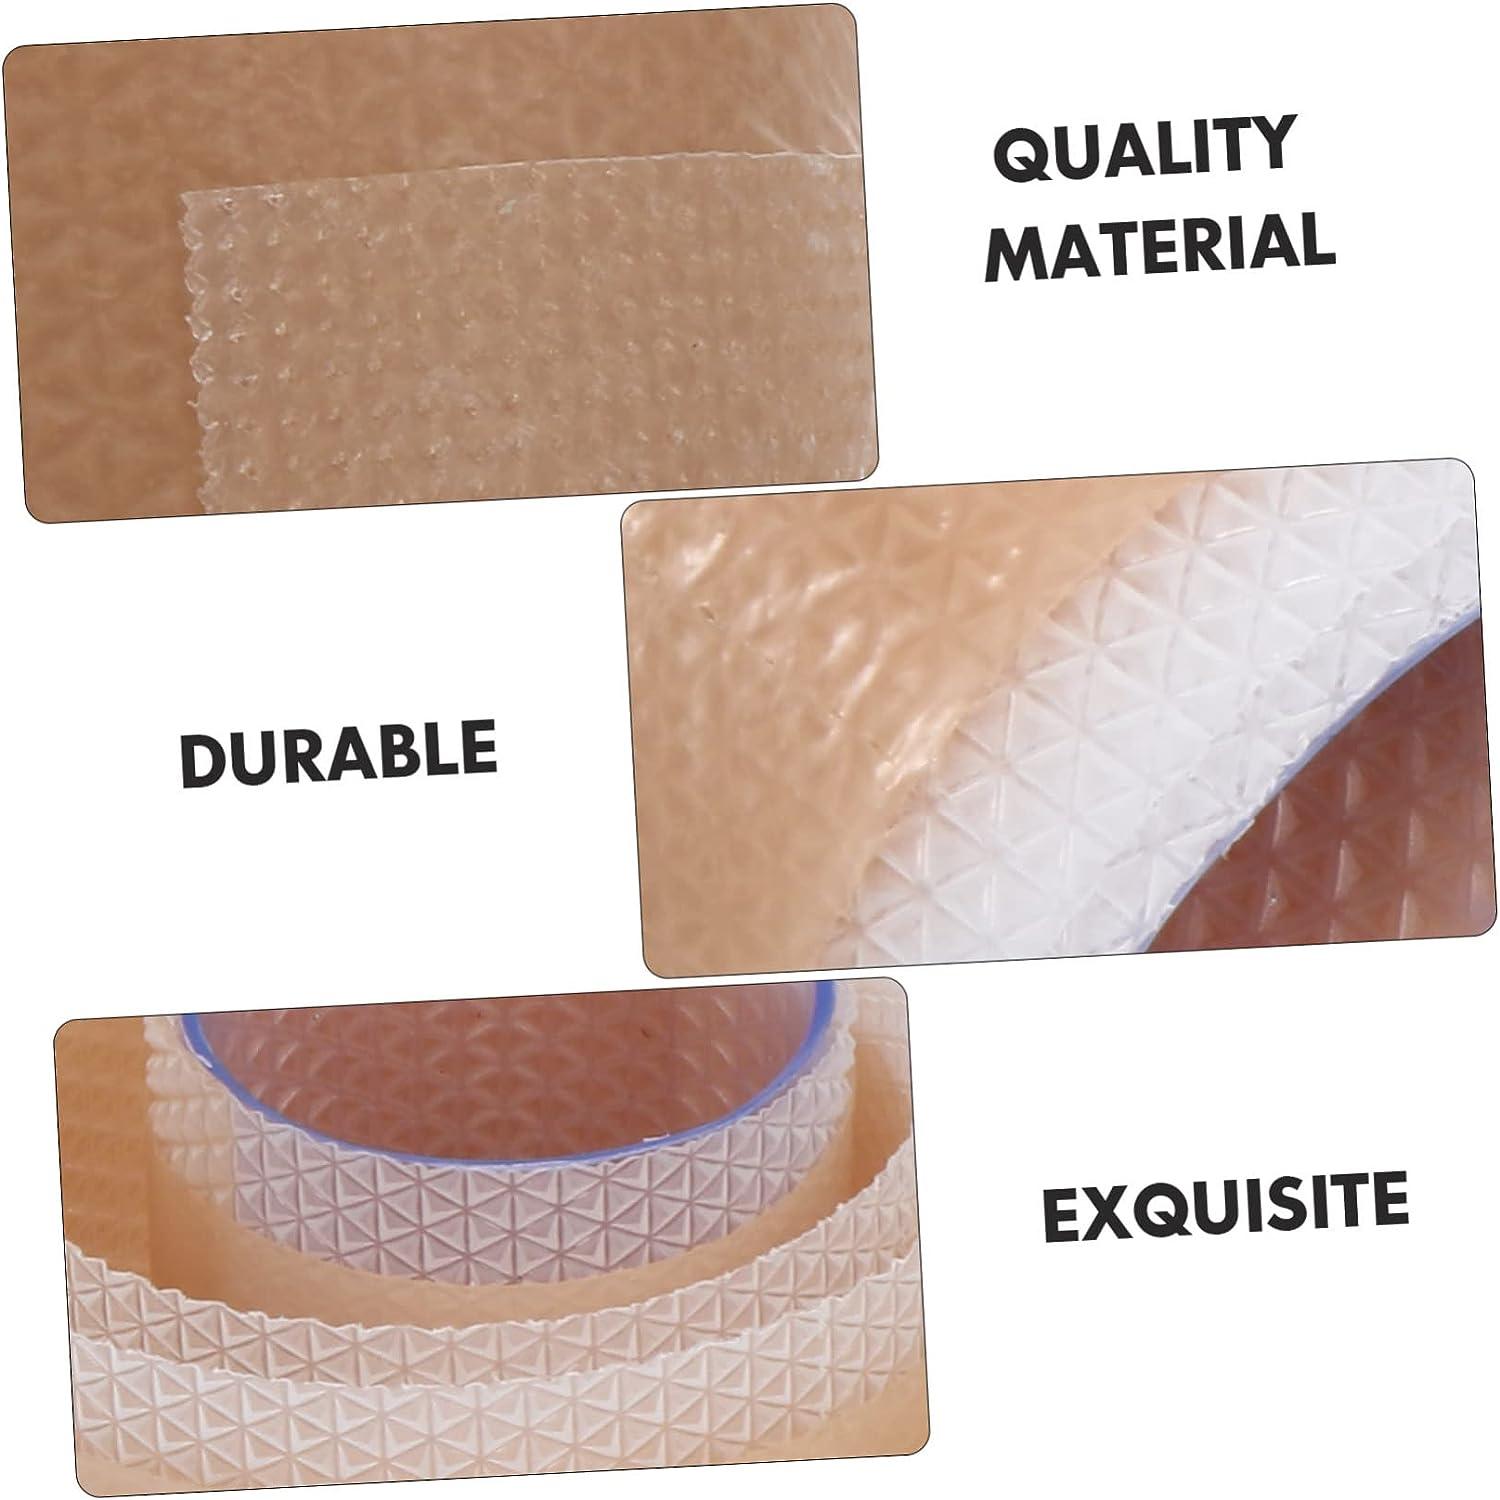 Silicone Gel Ear Tape 1 Roll Correction Stickers Invisible Tape